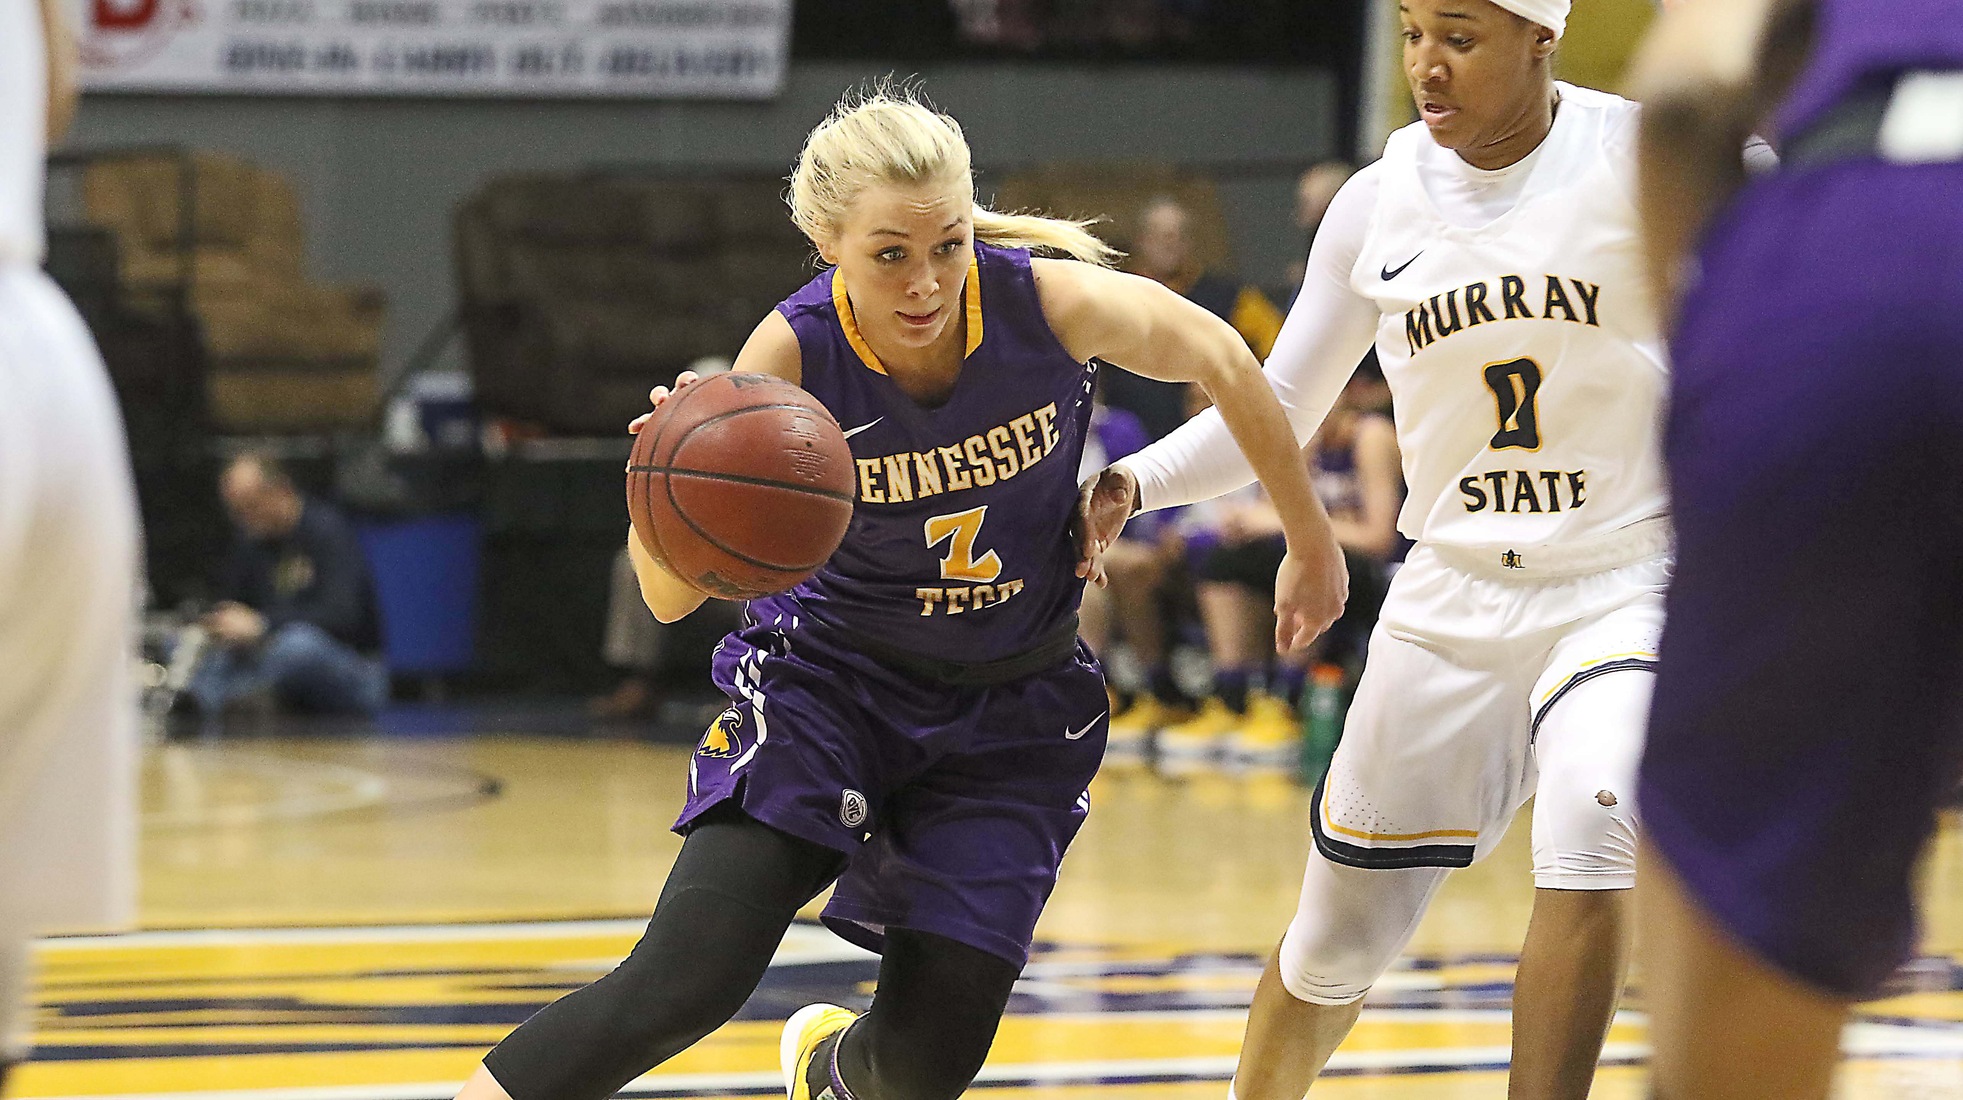 Tech out-shone offensively at Murray State